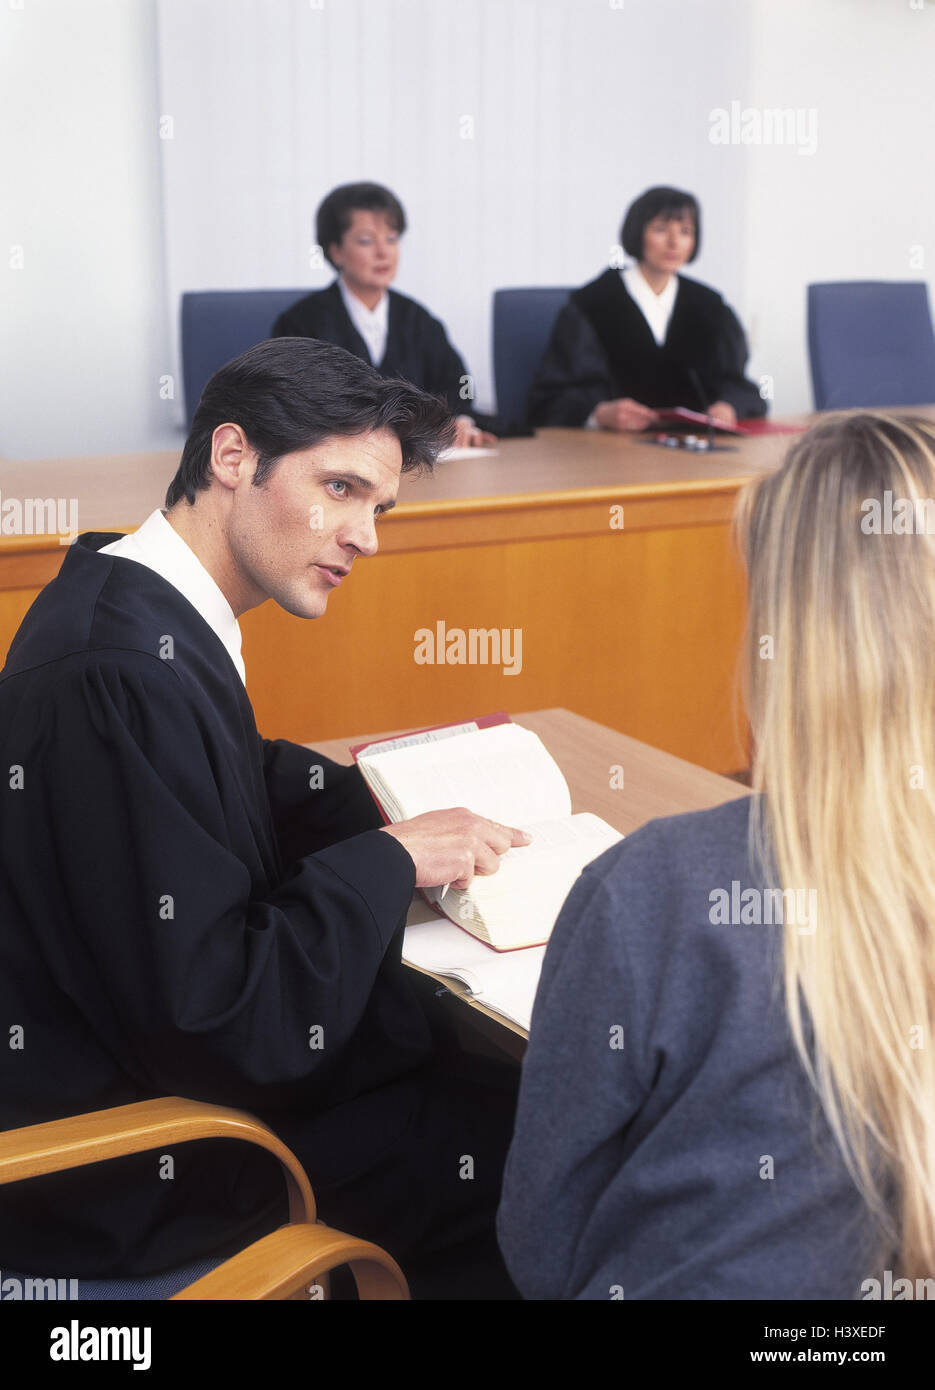 Courtroom, judge, federal prosecutor, sollicitor, client, code of law, conversation, lawyer, lawyer, legal matter, civil disput, course of justice, dish, defender, defendants, plaintiff, negotiations, sollicitor, charge, defence, hearing, explanation, inf Stock Photo